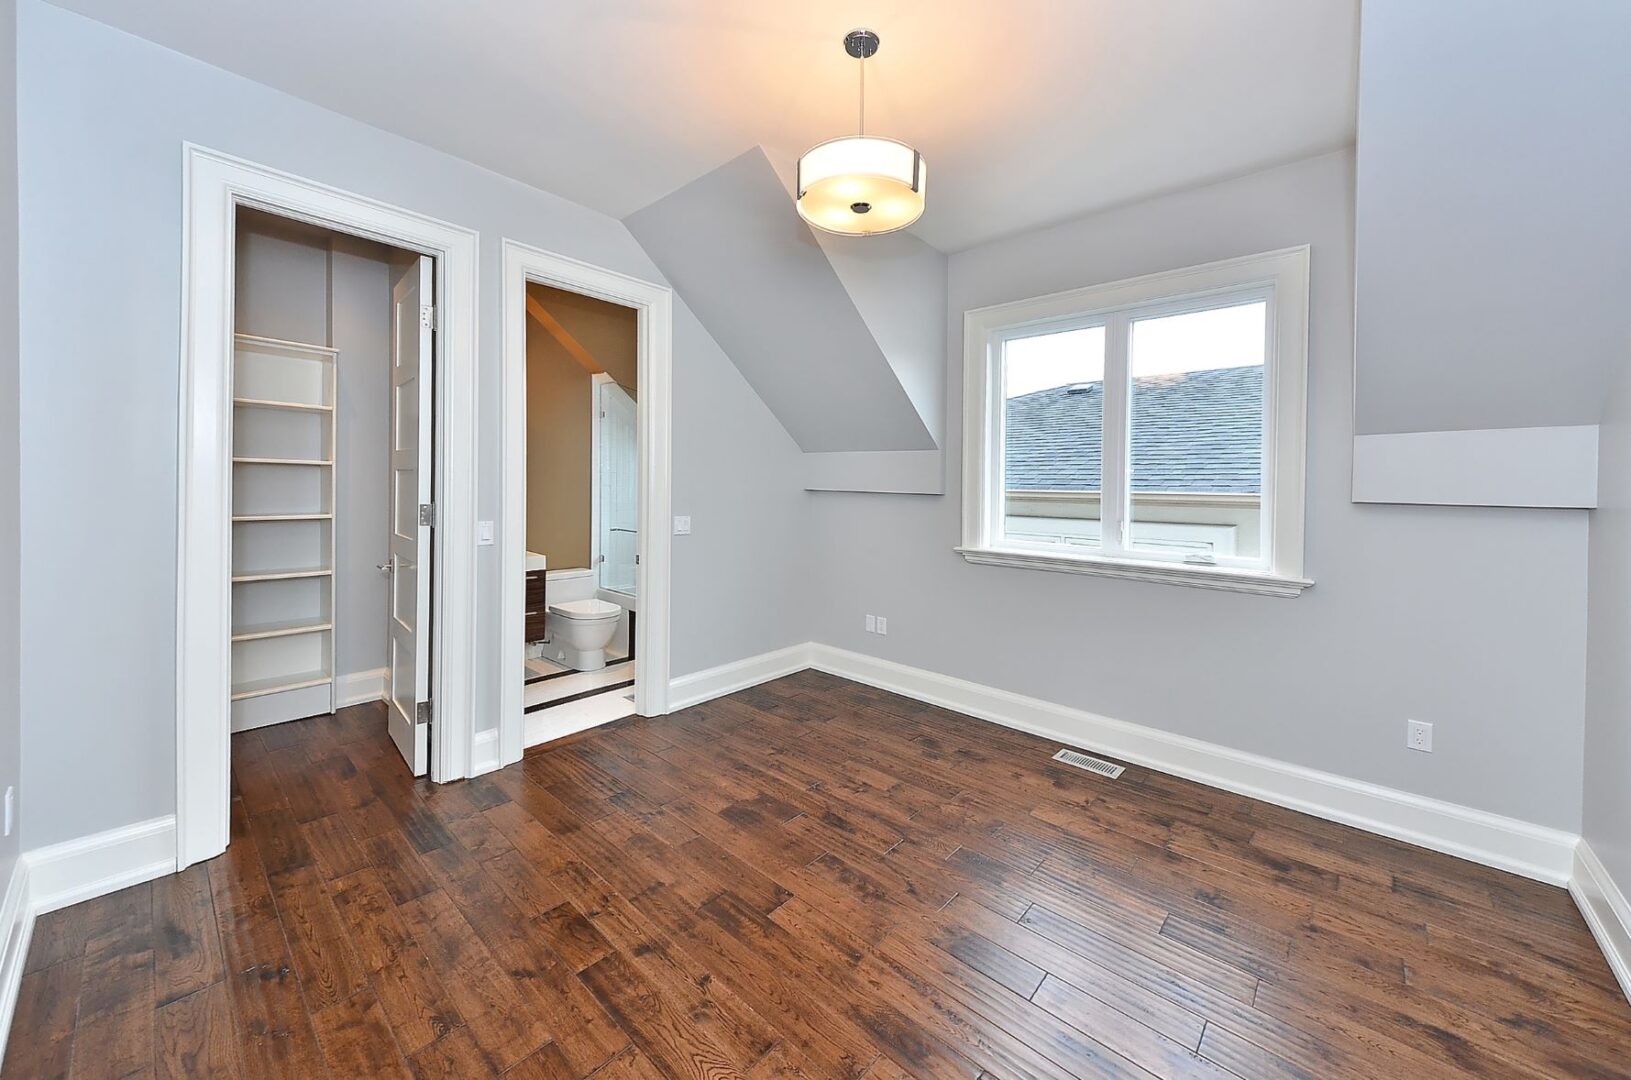 An Empty Room With Wood Panel Flooring